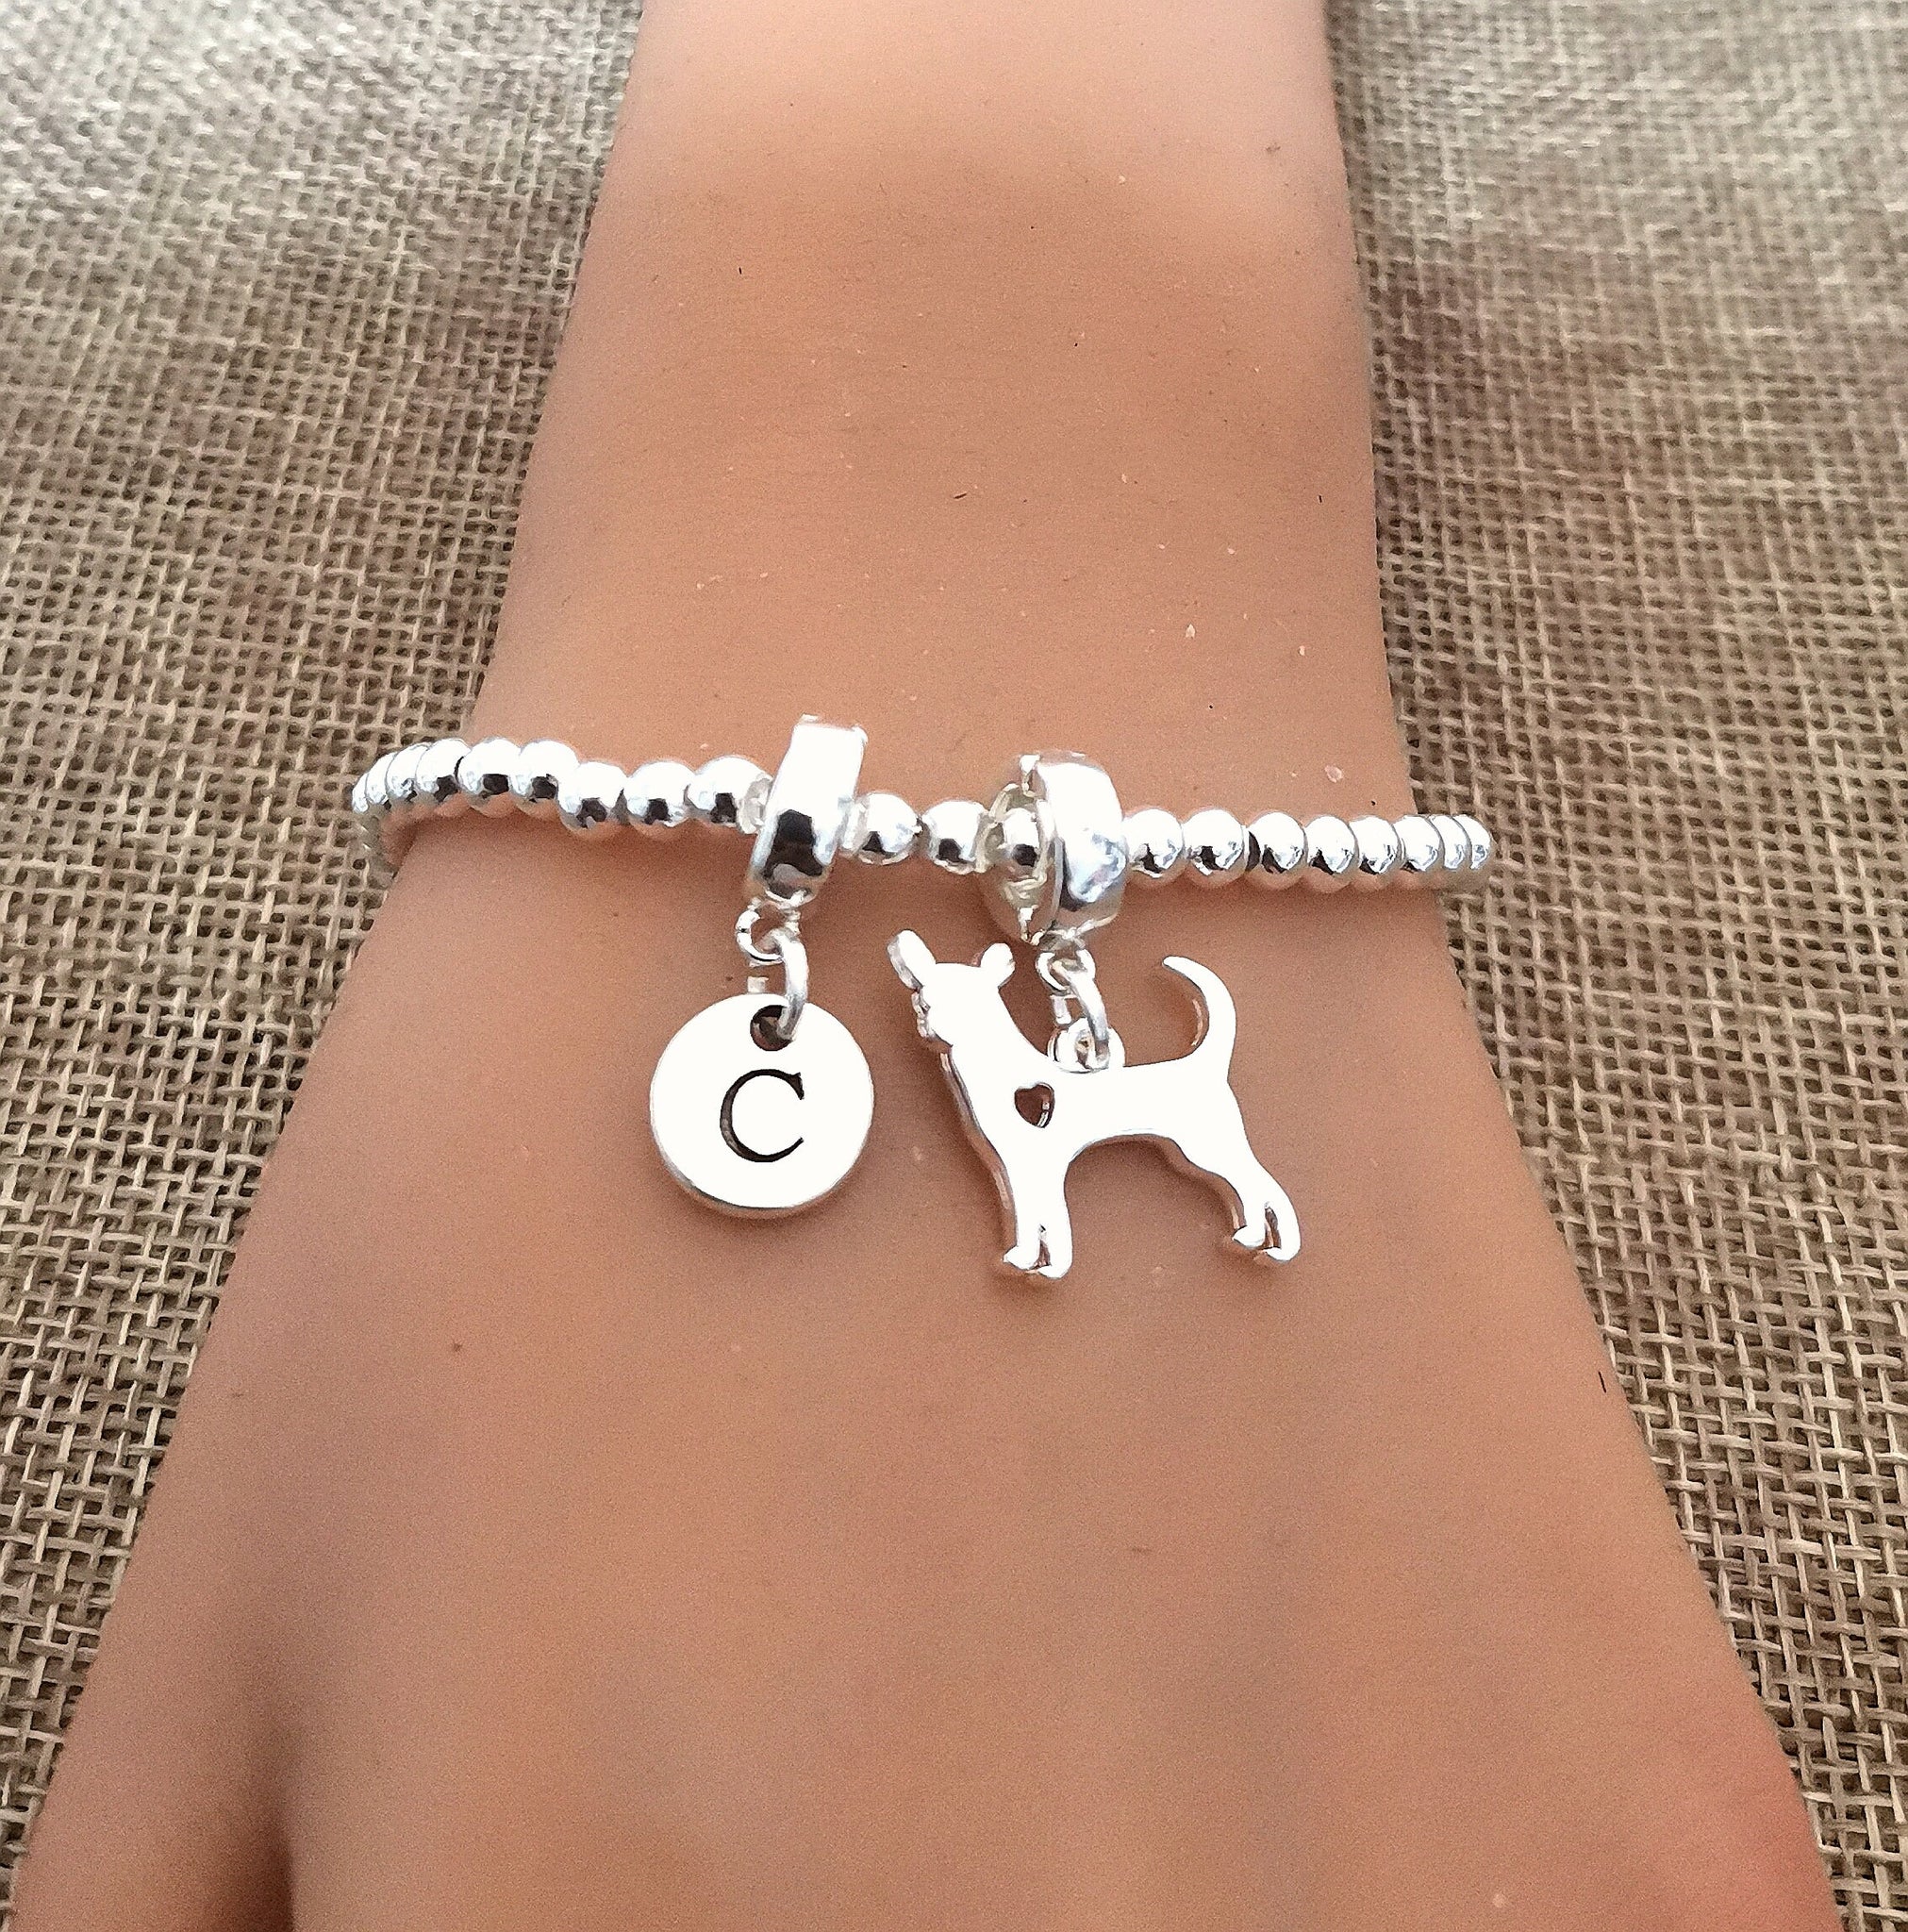 Jack Russell Bracelet, Jack Russell Terrier Bracelet Women, Jack Russell Gifts, Jack Russell Jewelry, Jack Russell Gifts for Her, Dog